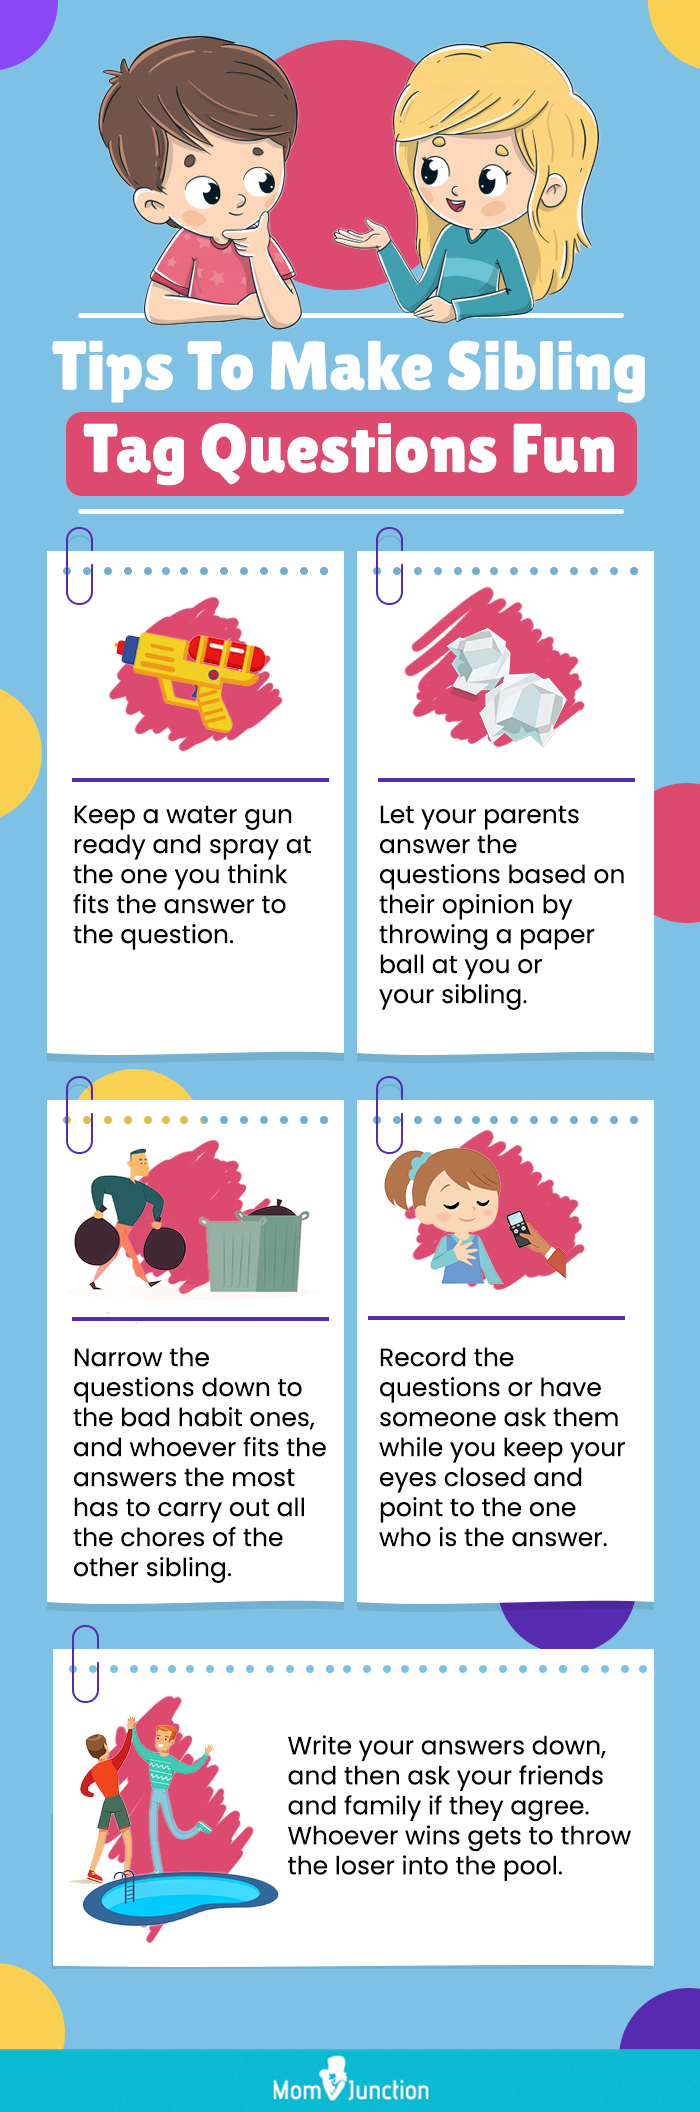 tips on sibling tag questions (infographic)